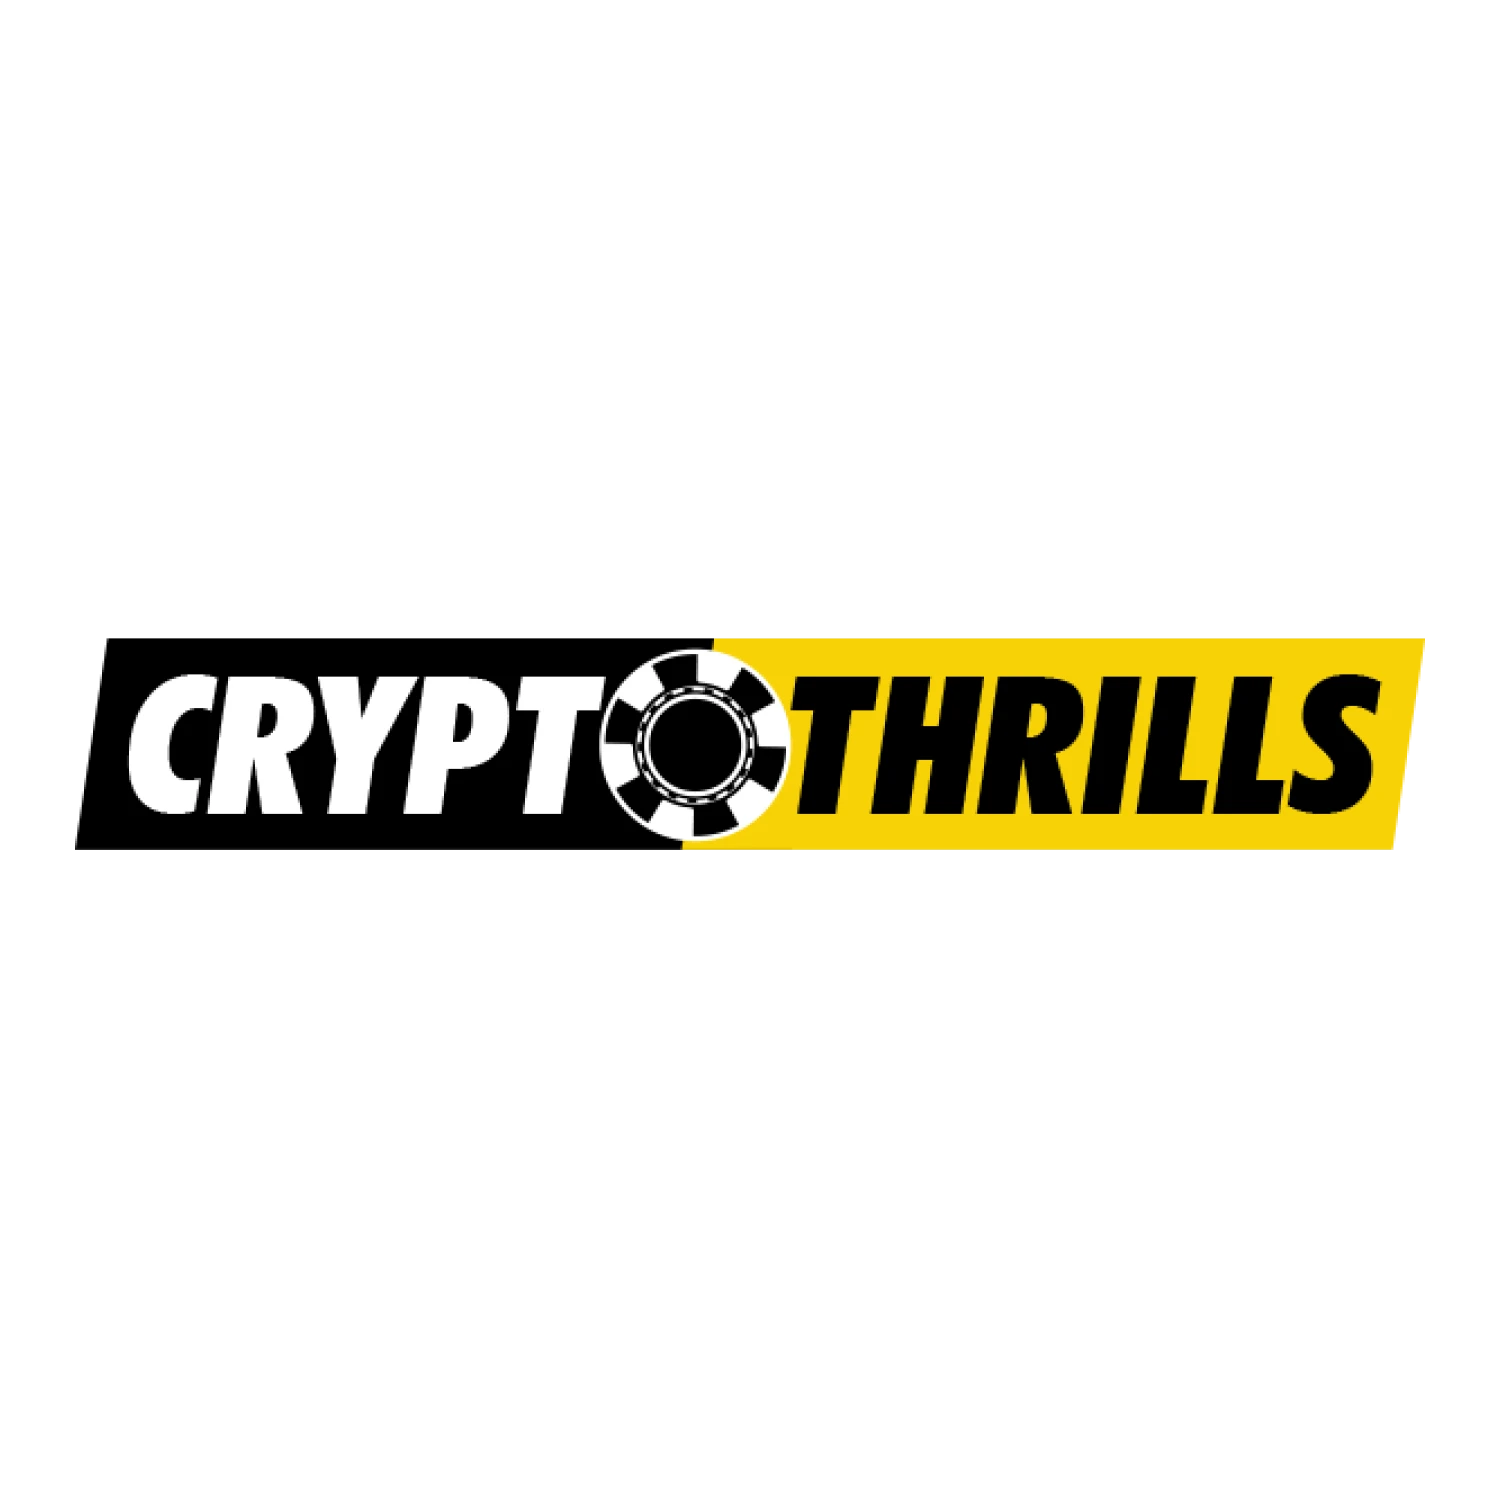 Place bets at Cryptothrills casino.